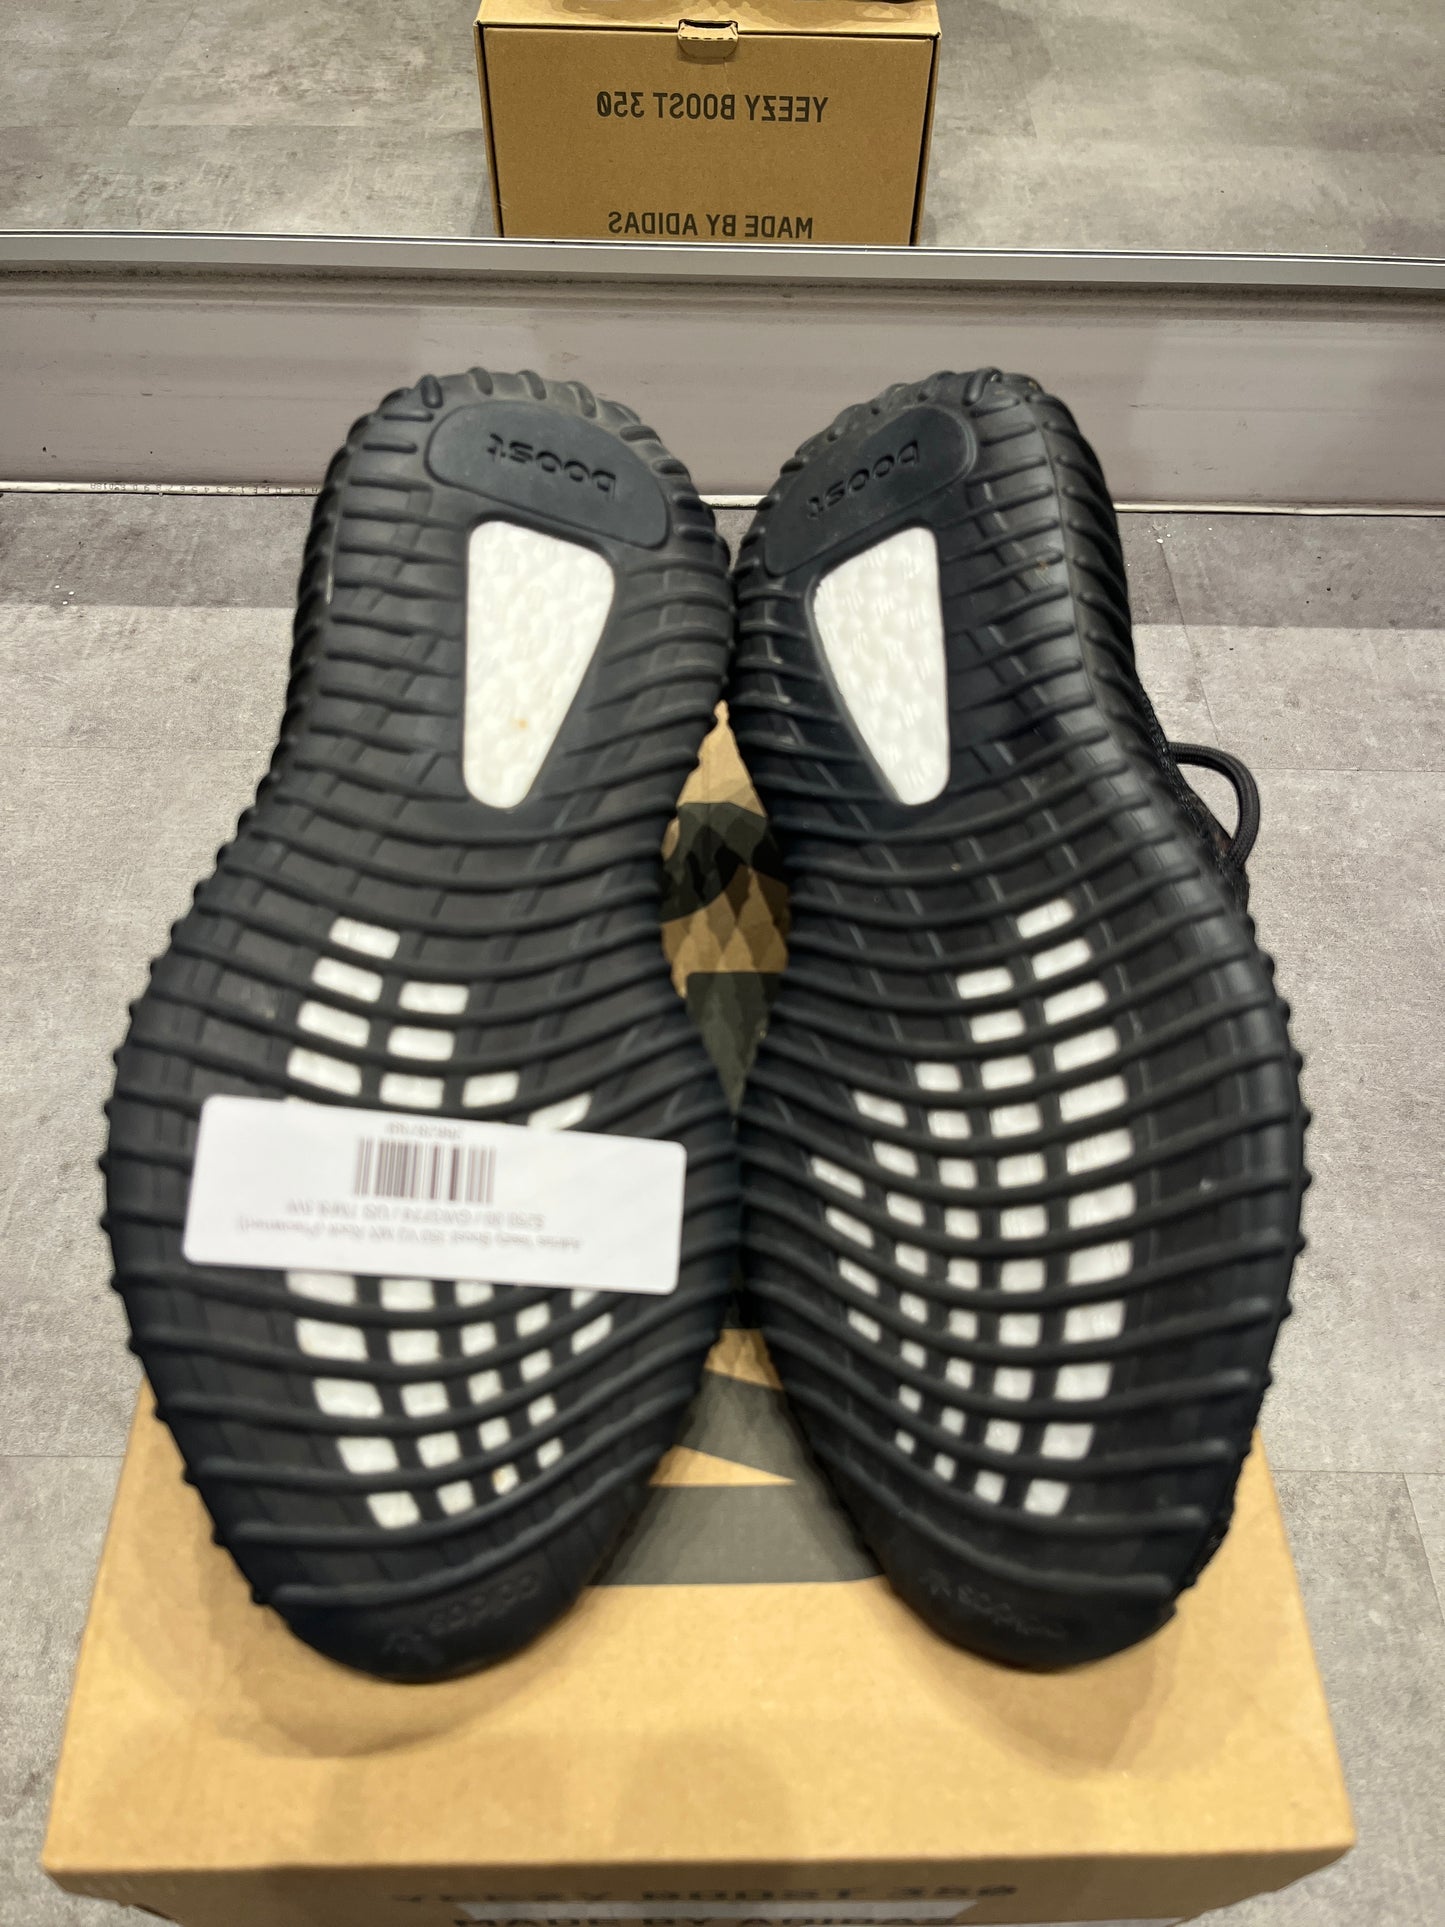 Adidas Yeezy Boost 350 V2 MX Rock (Preowned)